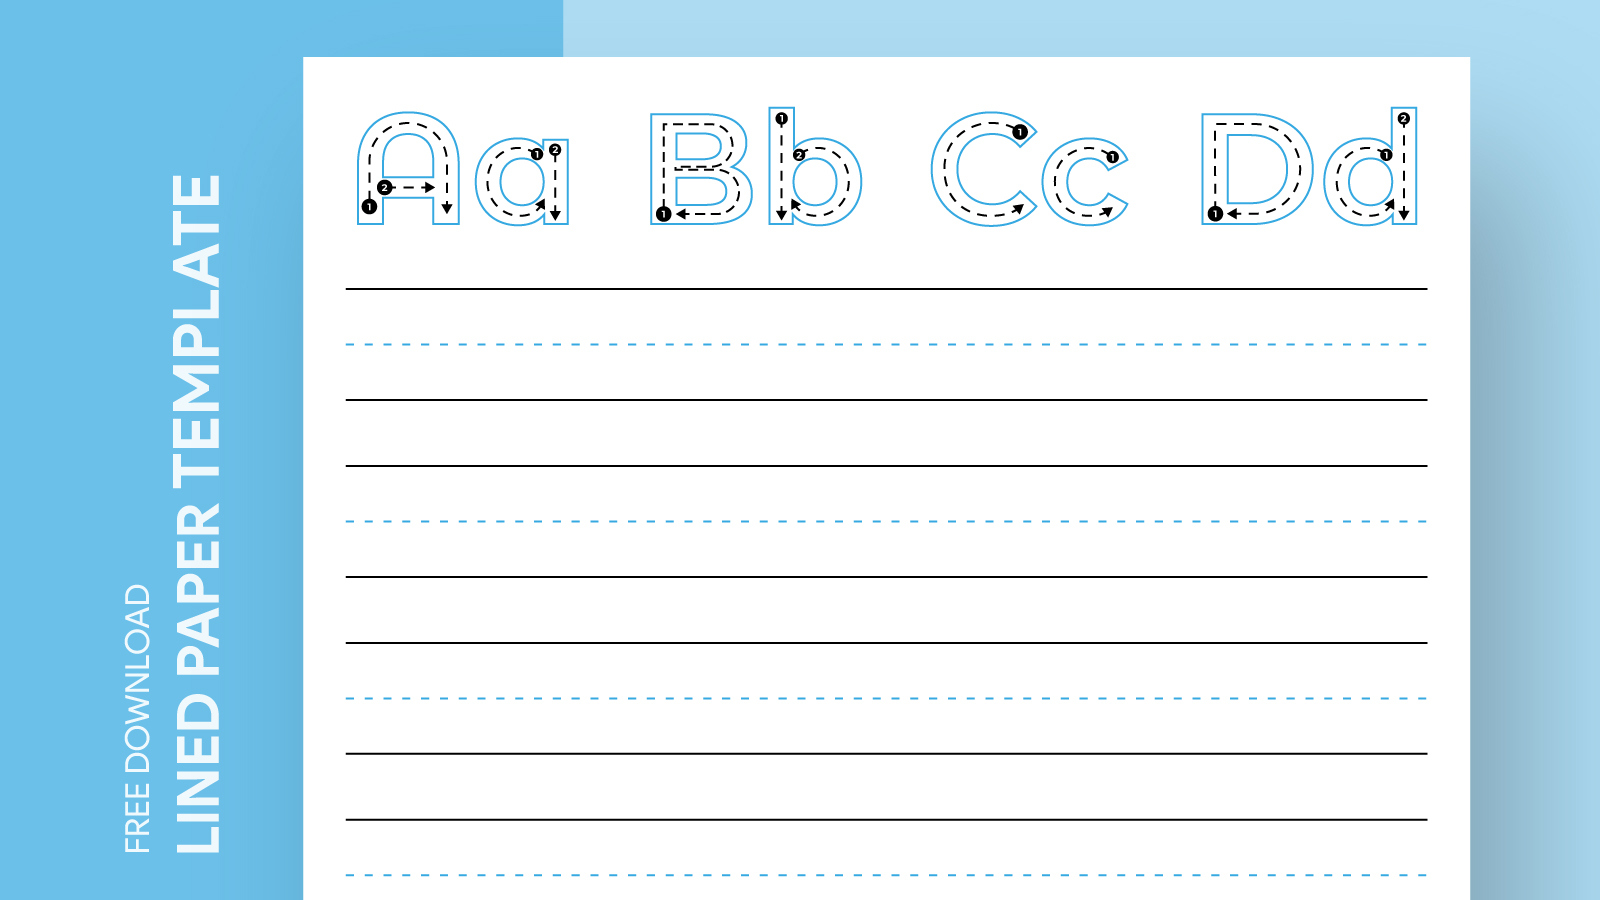 Kindergarten Lined Paper Free Google Docs Template - Gdoc.io pertaining to Free Printable Kindergarten Lined Paper Template